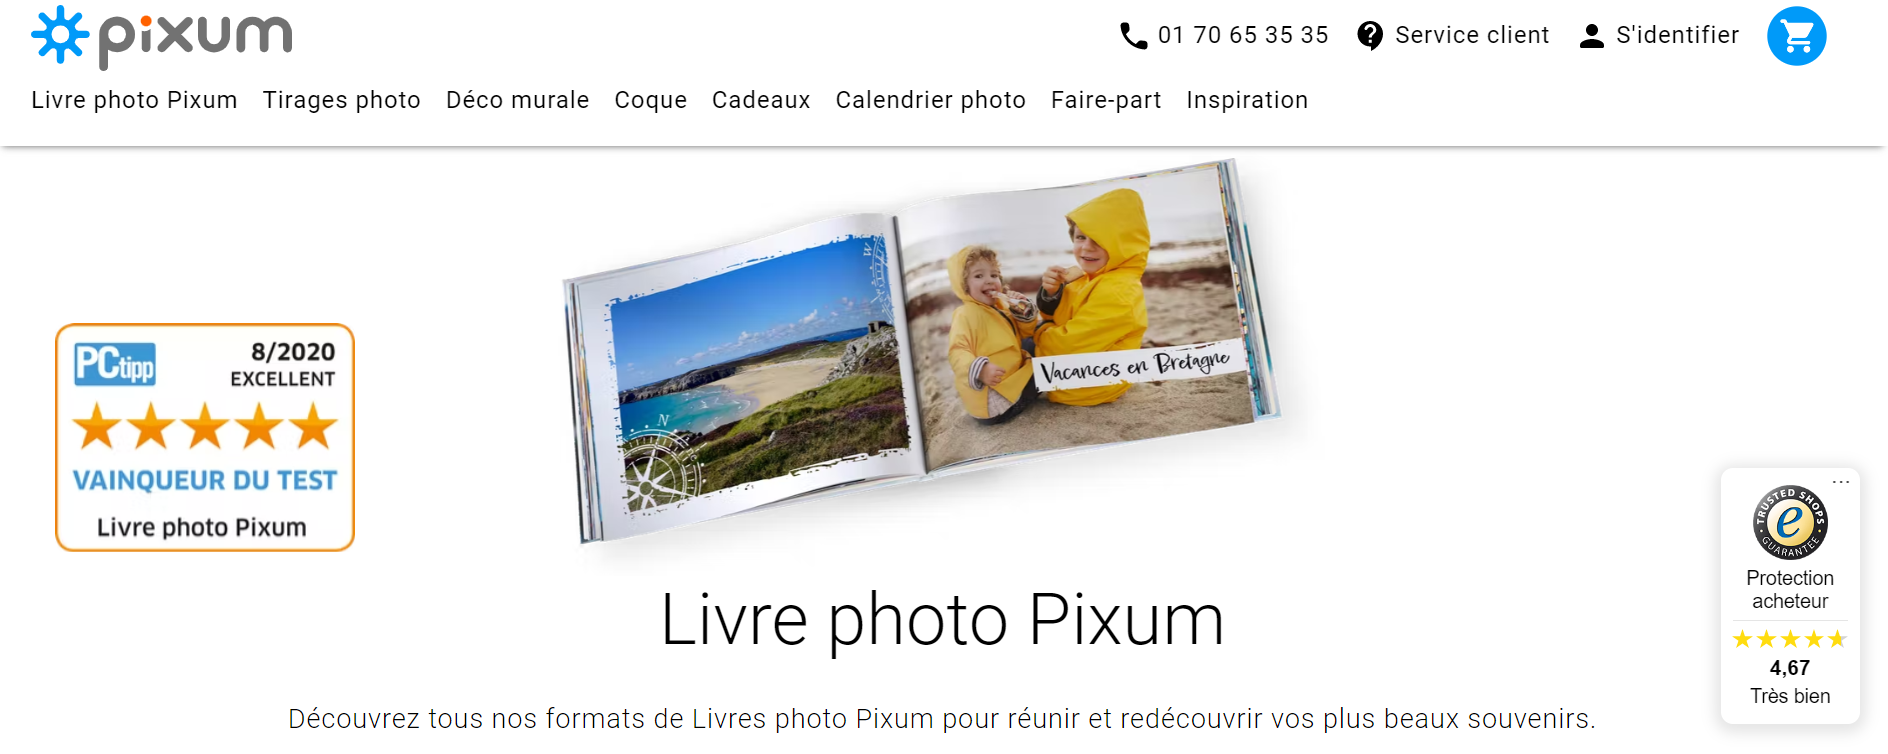 Pixum-FR-Trusted-Shops